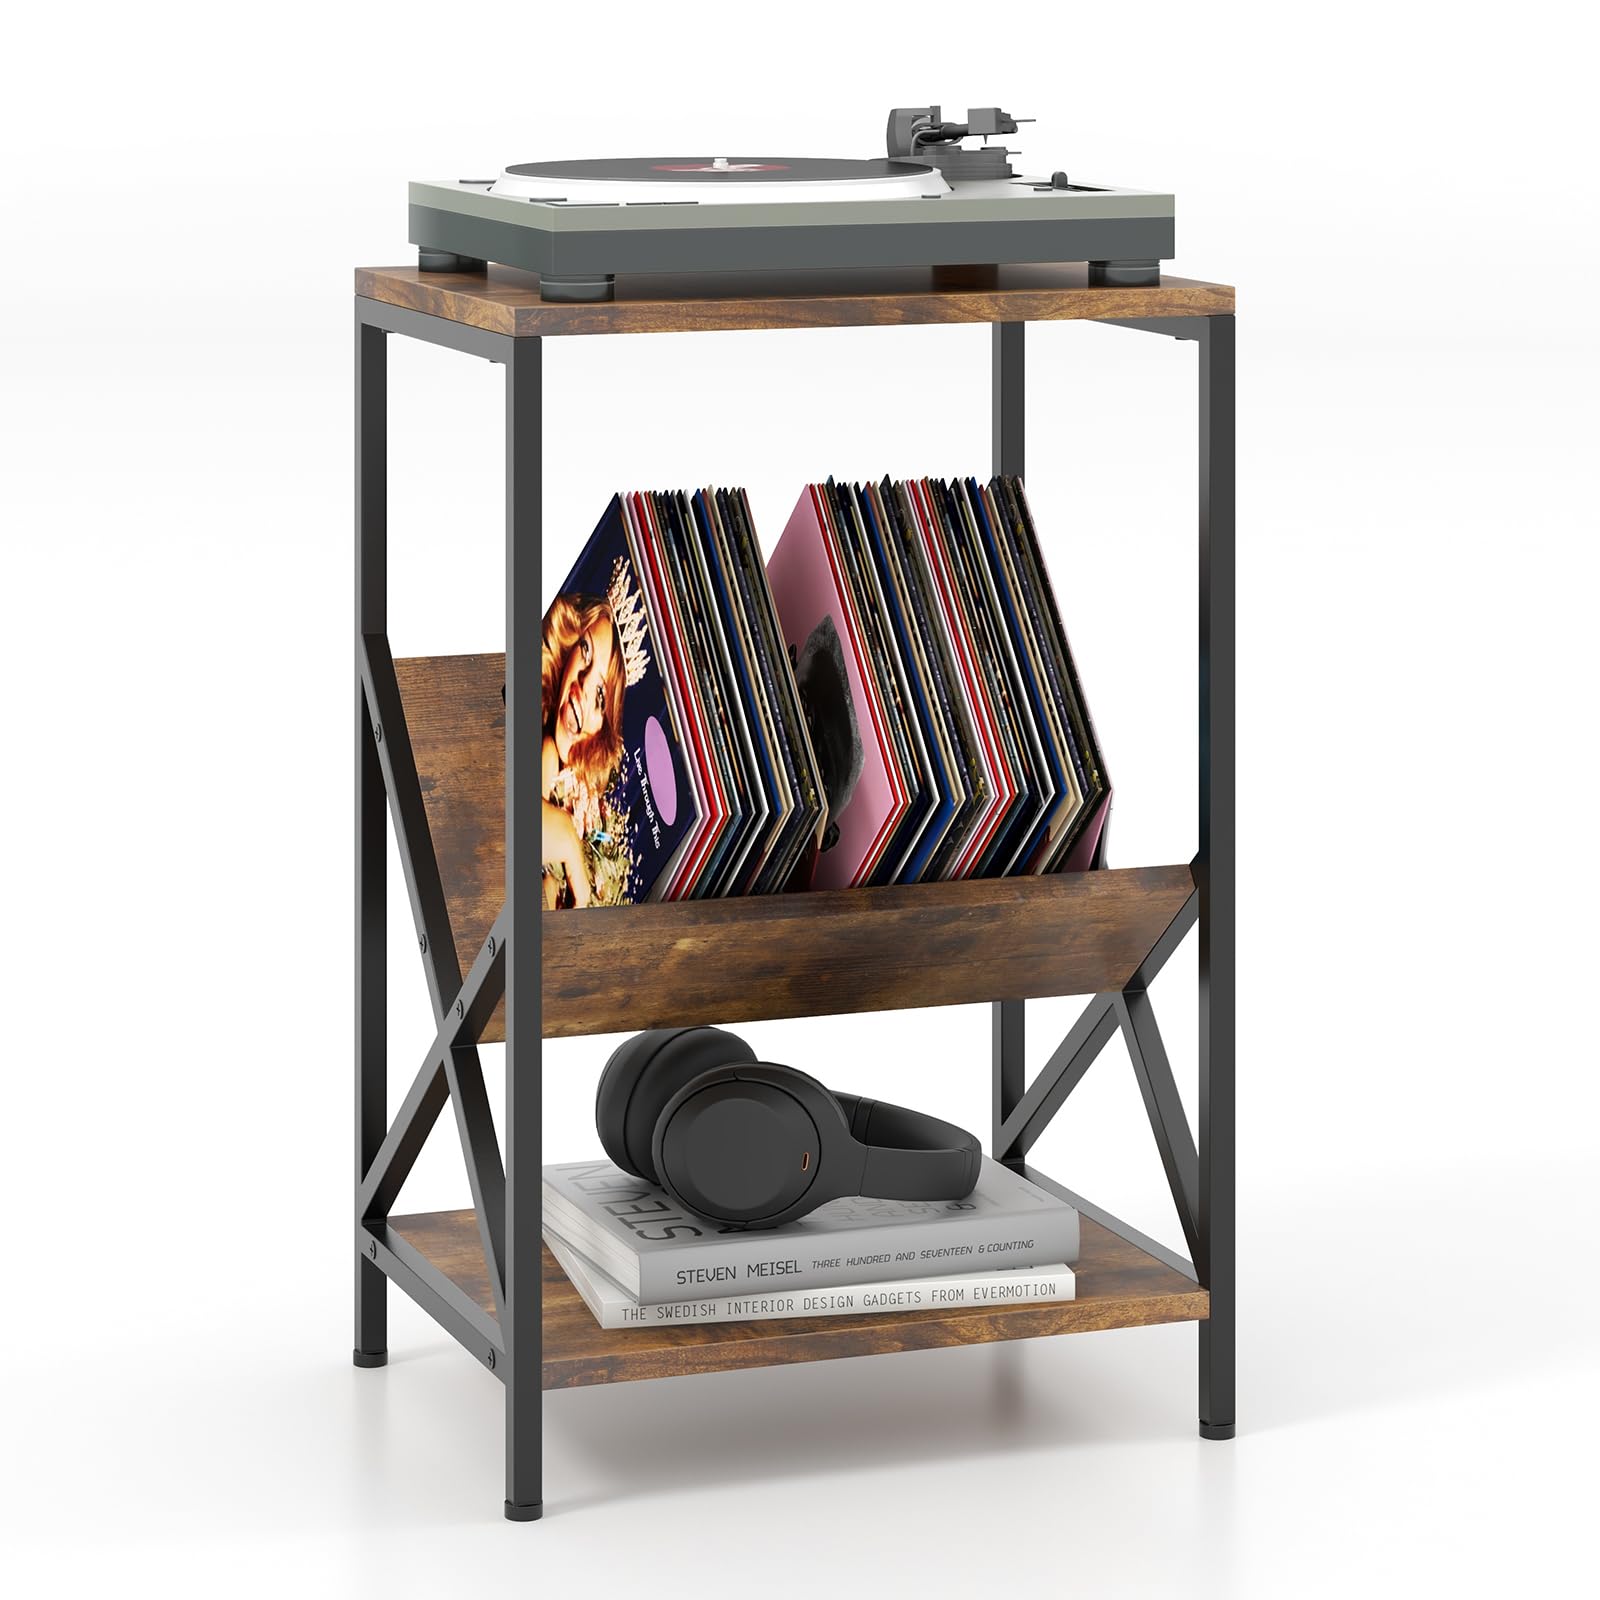 Giantex Record Player Stand, 3-Tier End Table w/ V-Shaped Magazine Holder, Turntable Stand with Record Storage Up to 80 Albums